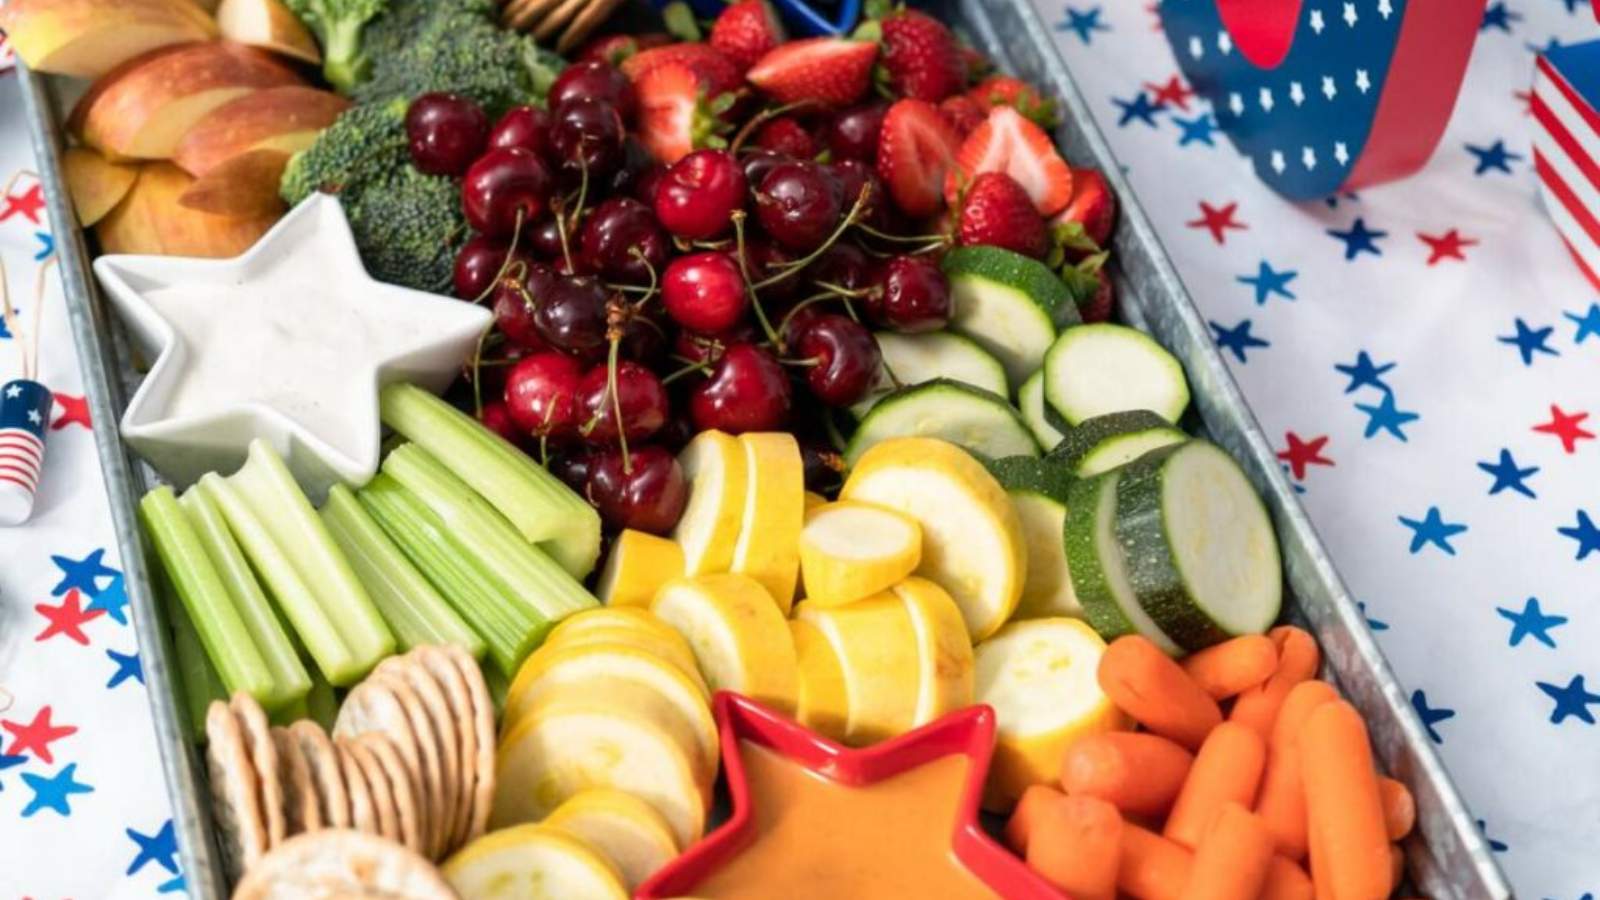 A tray of assorted fruits, vegetables, and crackers on a table with USA letters in the background.